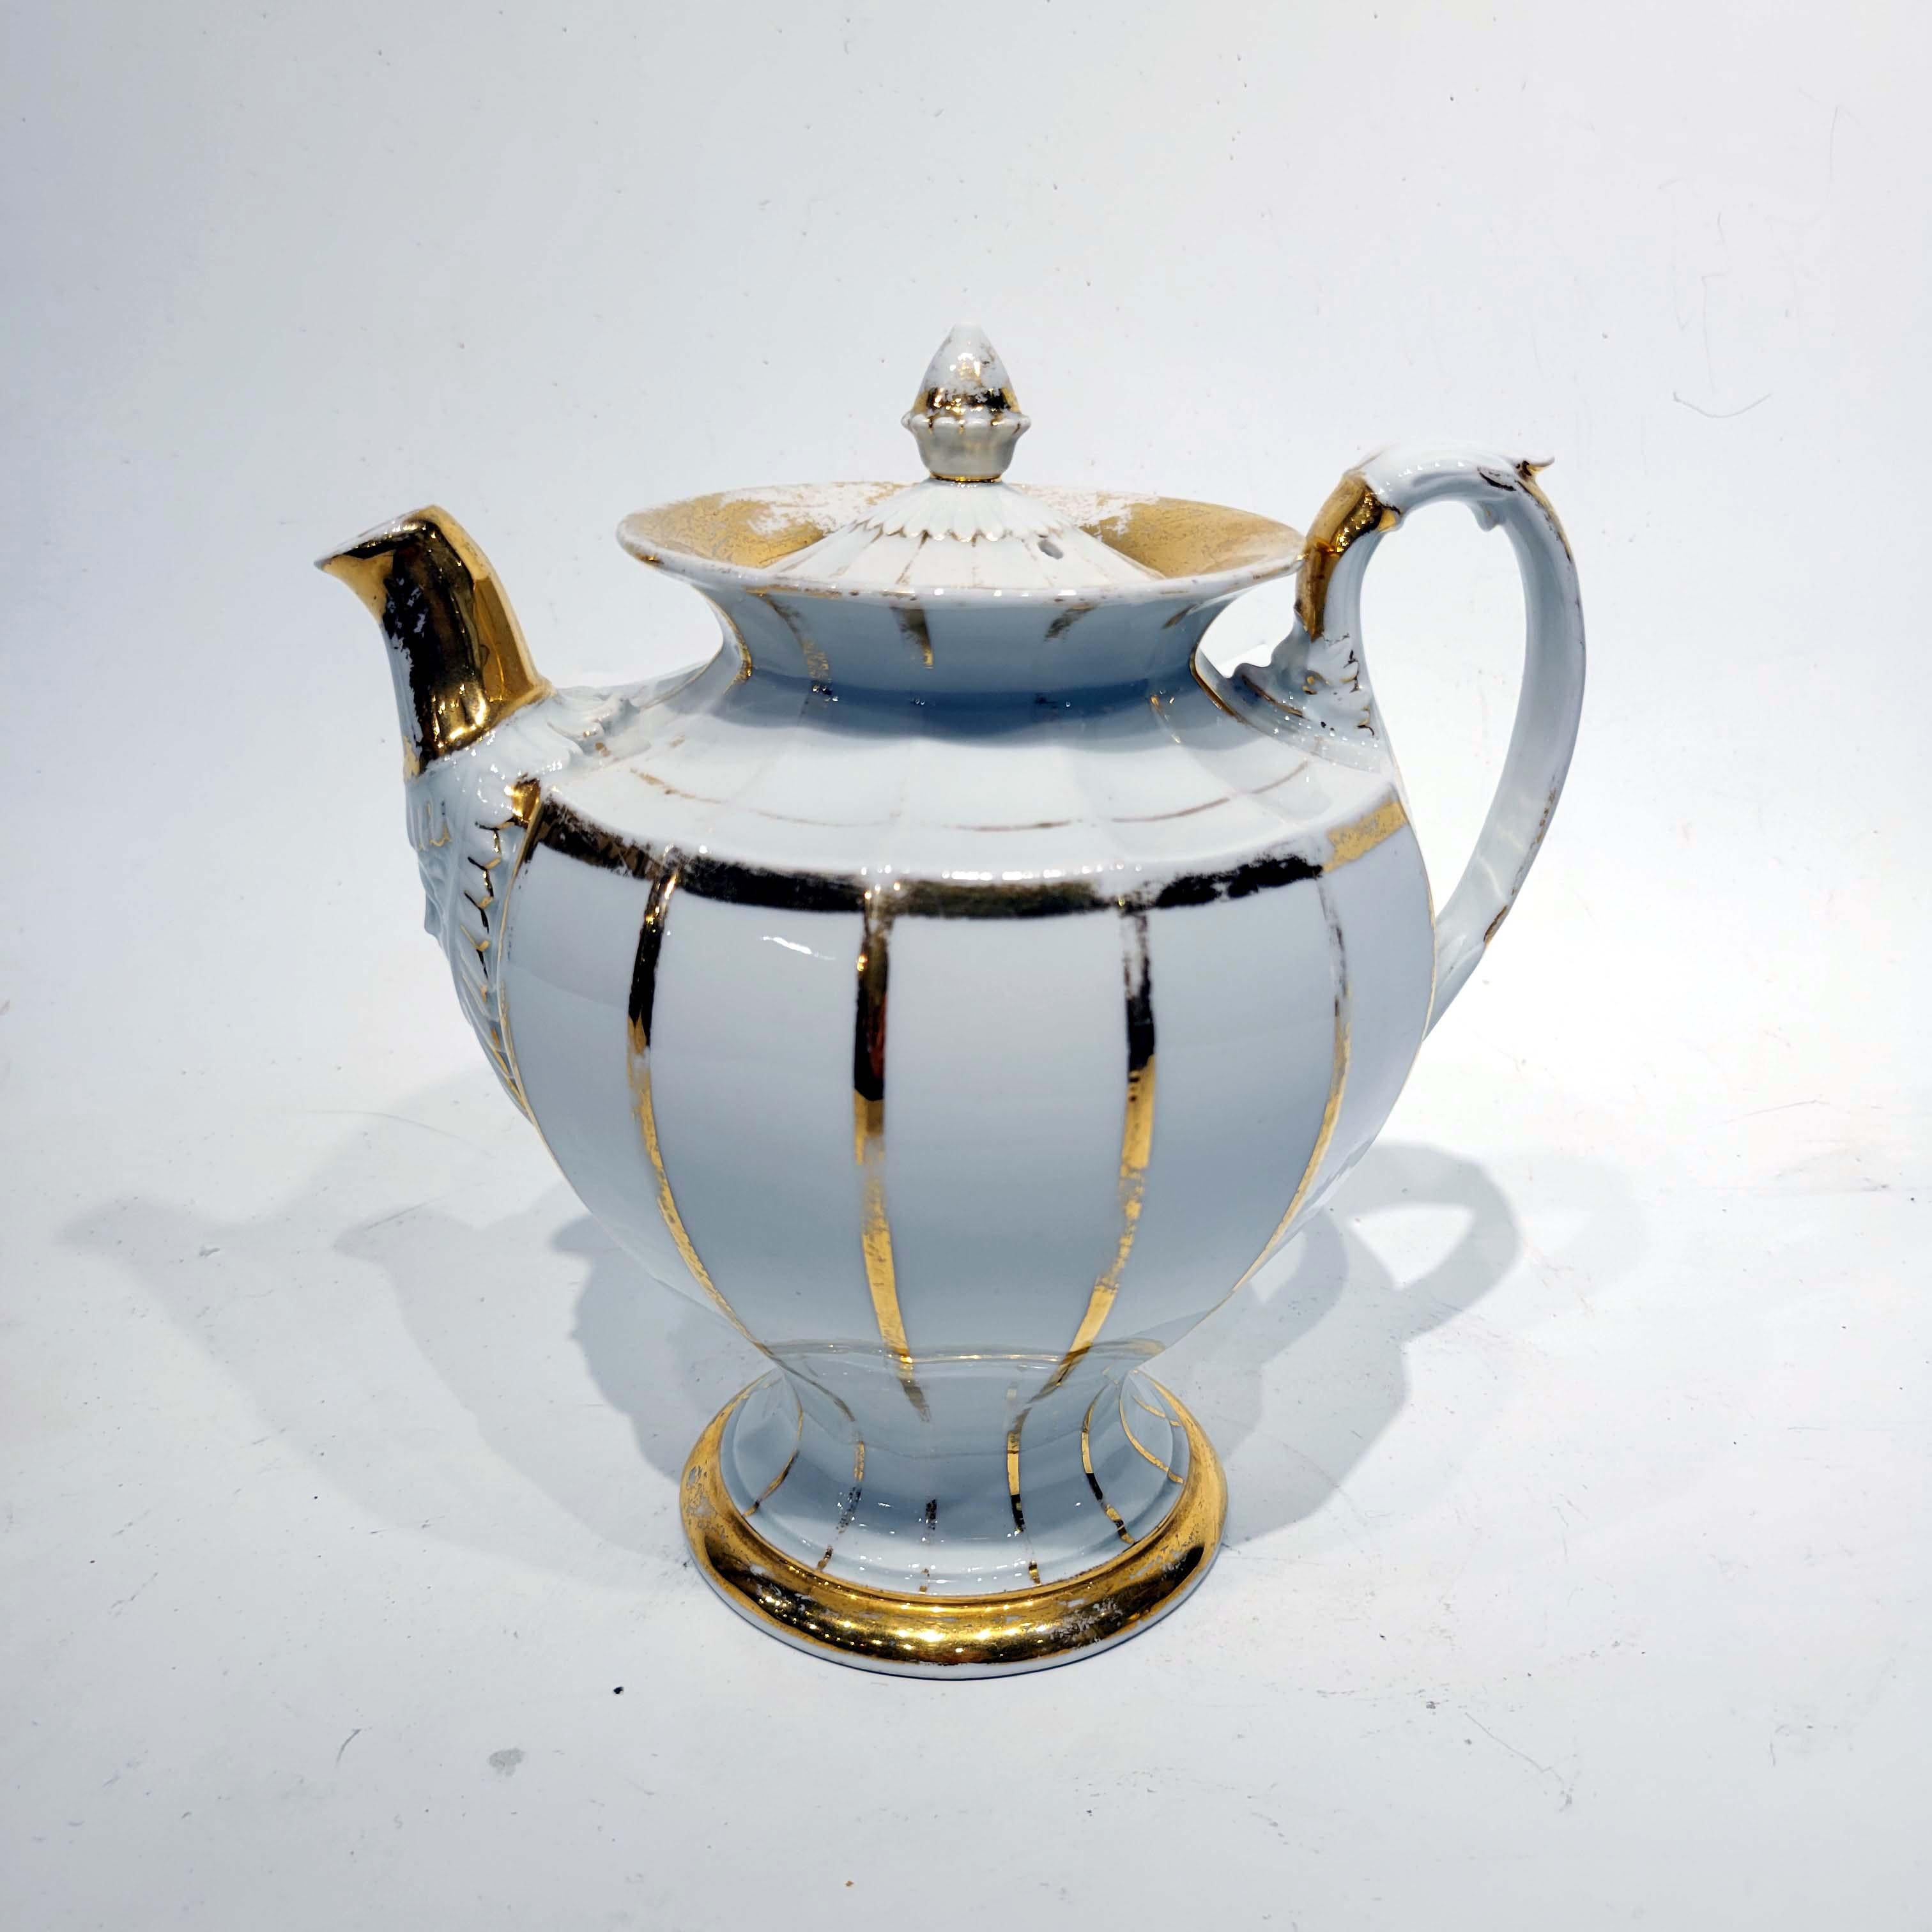 A wonderful first quality Meissen porcelain white porcelain coffee pot with gold decoration, circa 1810, Germany.
There is wear to the gilding, consistent with age and use, however there is no damage or repair.
  